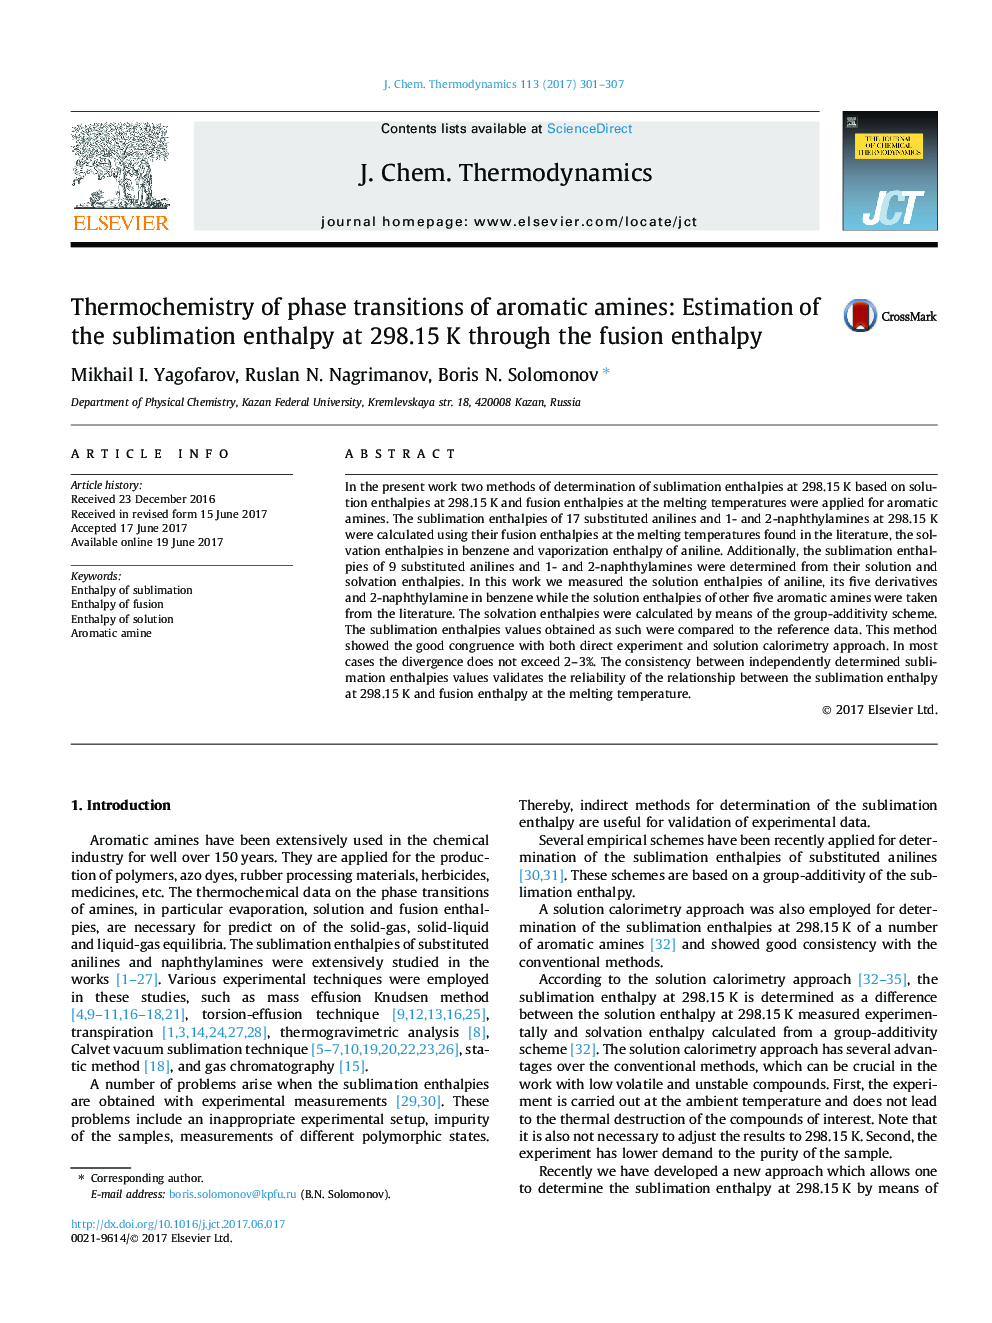 Thermochemistry of phase transitions of aromatic amines: Estimation of the sublimation enthalpy at 298.15Â K through the fusion enthalpy